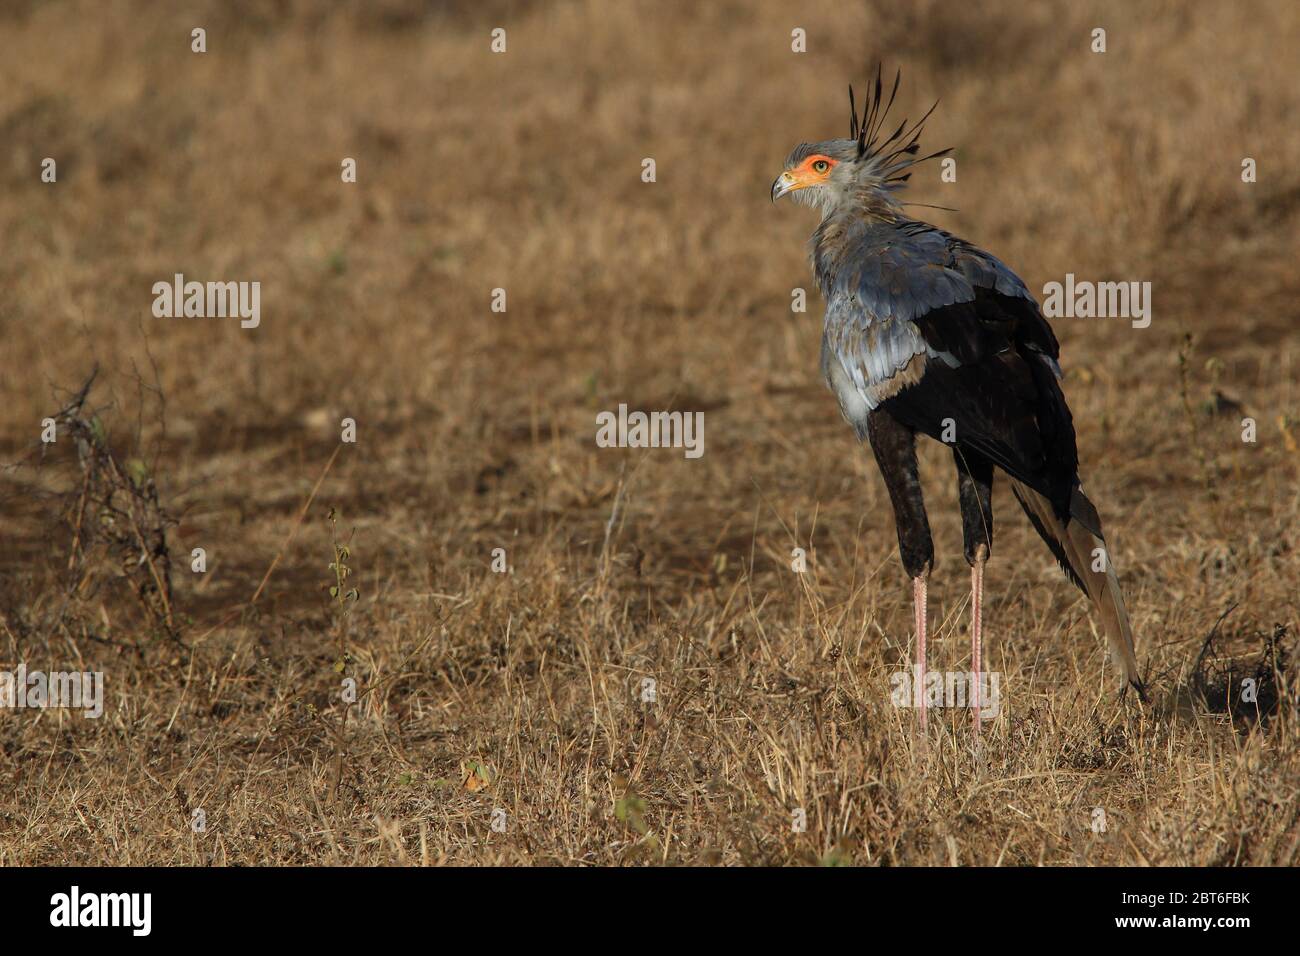 Photographed from behind but with one of its eyes still visible, a secretarybird roams the savannah of South Africa in search of prey. Stock Photo